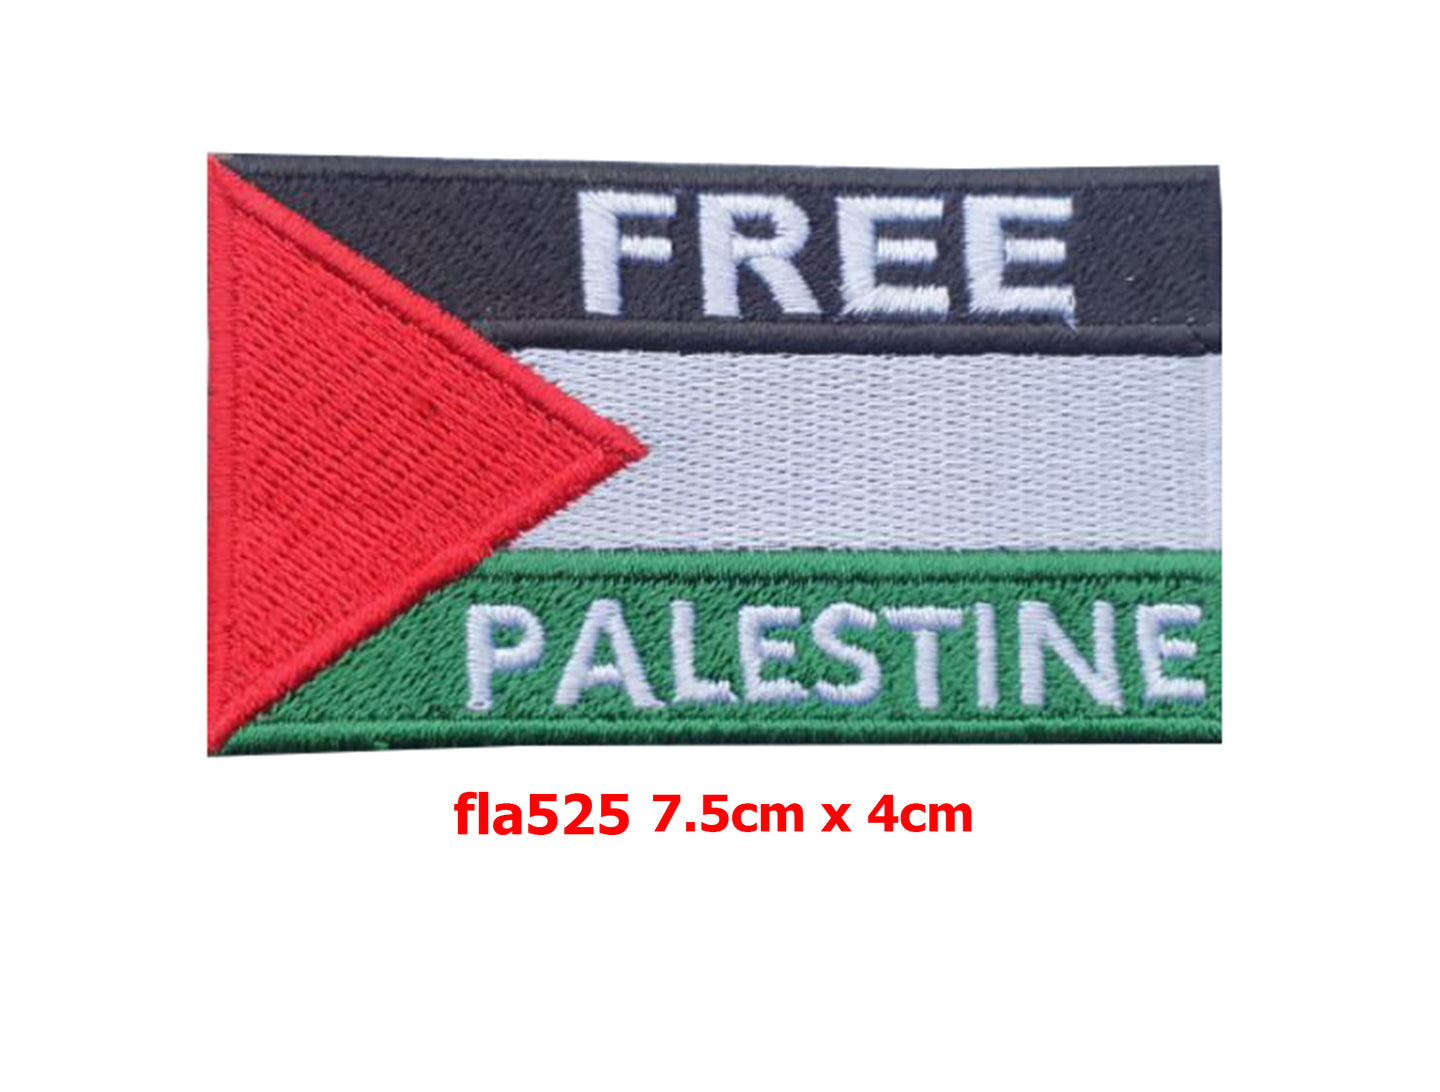 Free Palestine Embroidered Patches Iron/Sew on